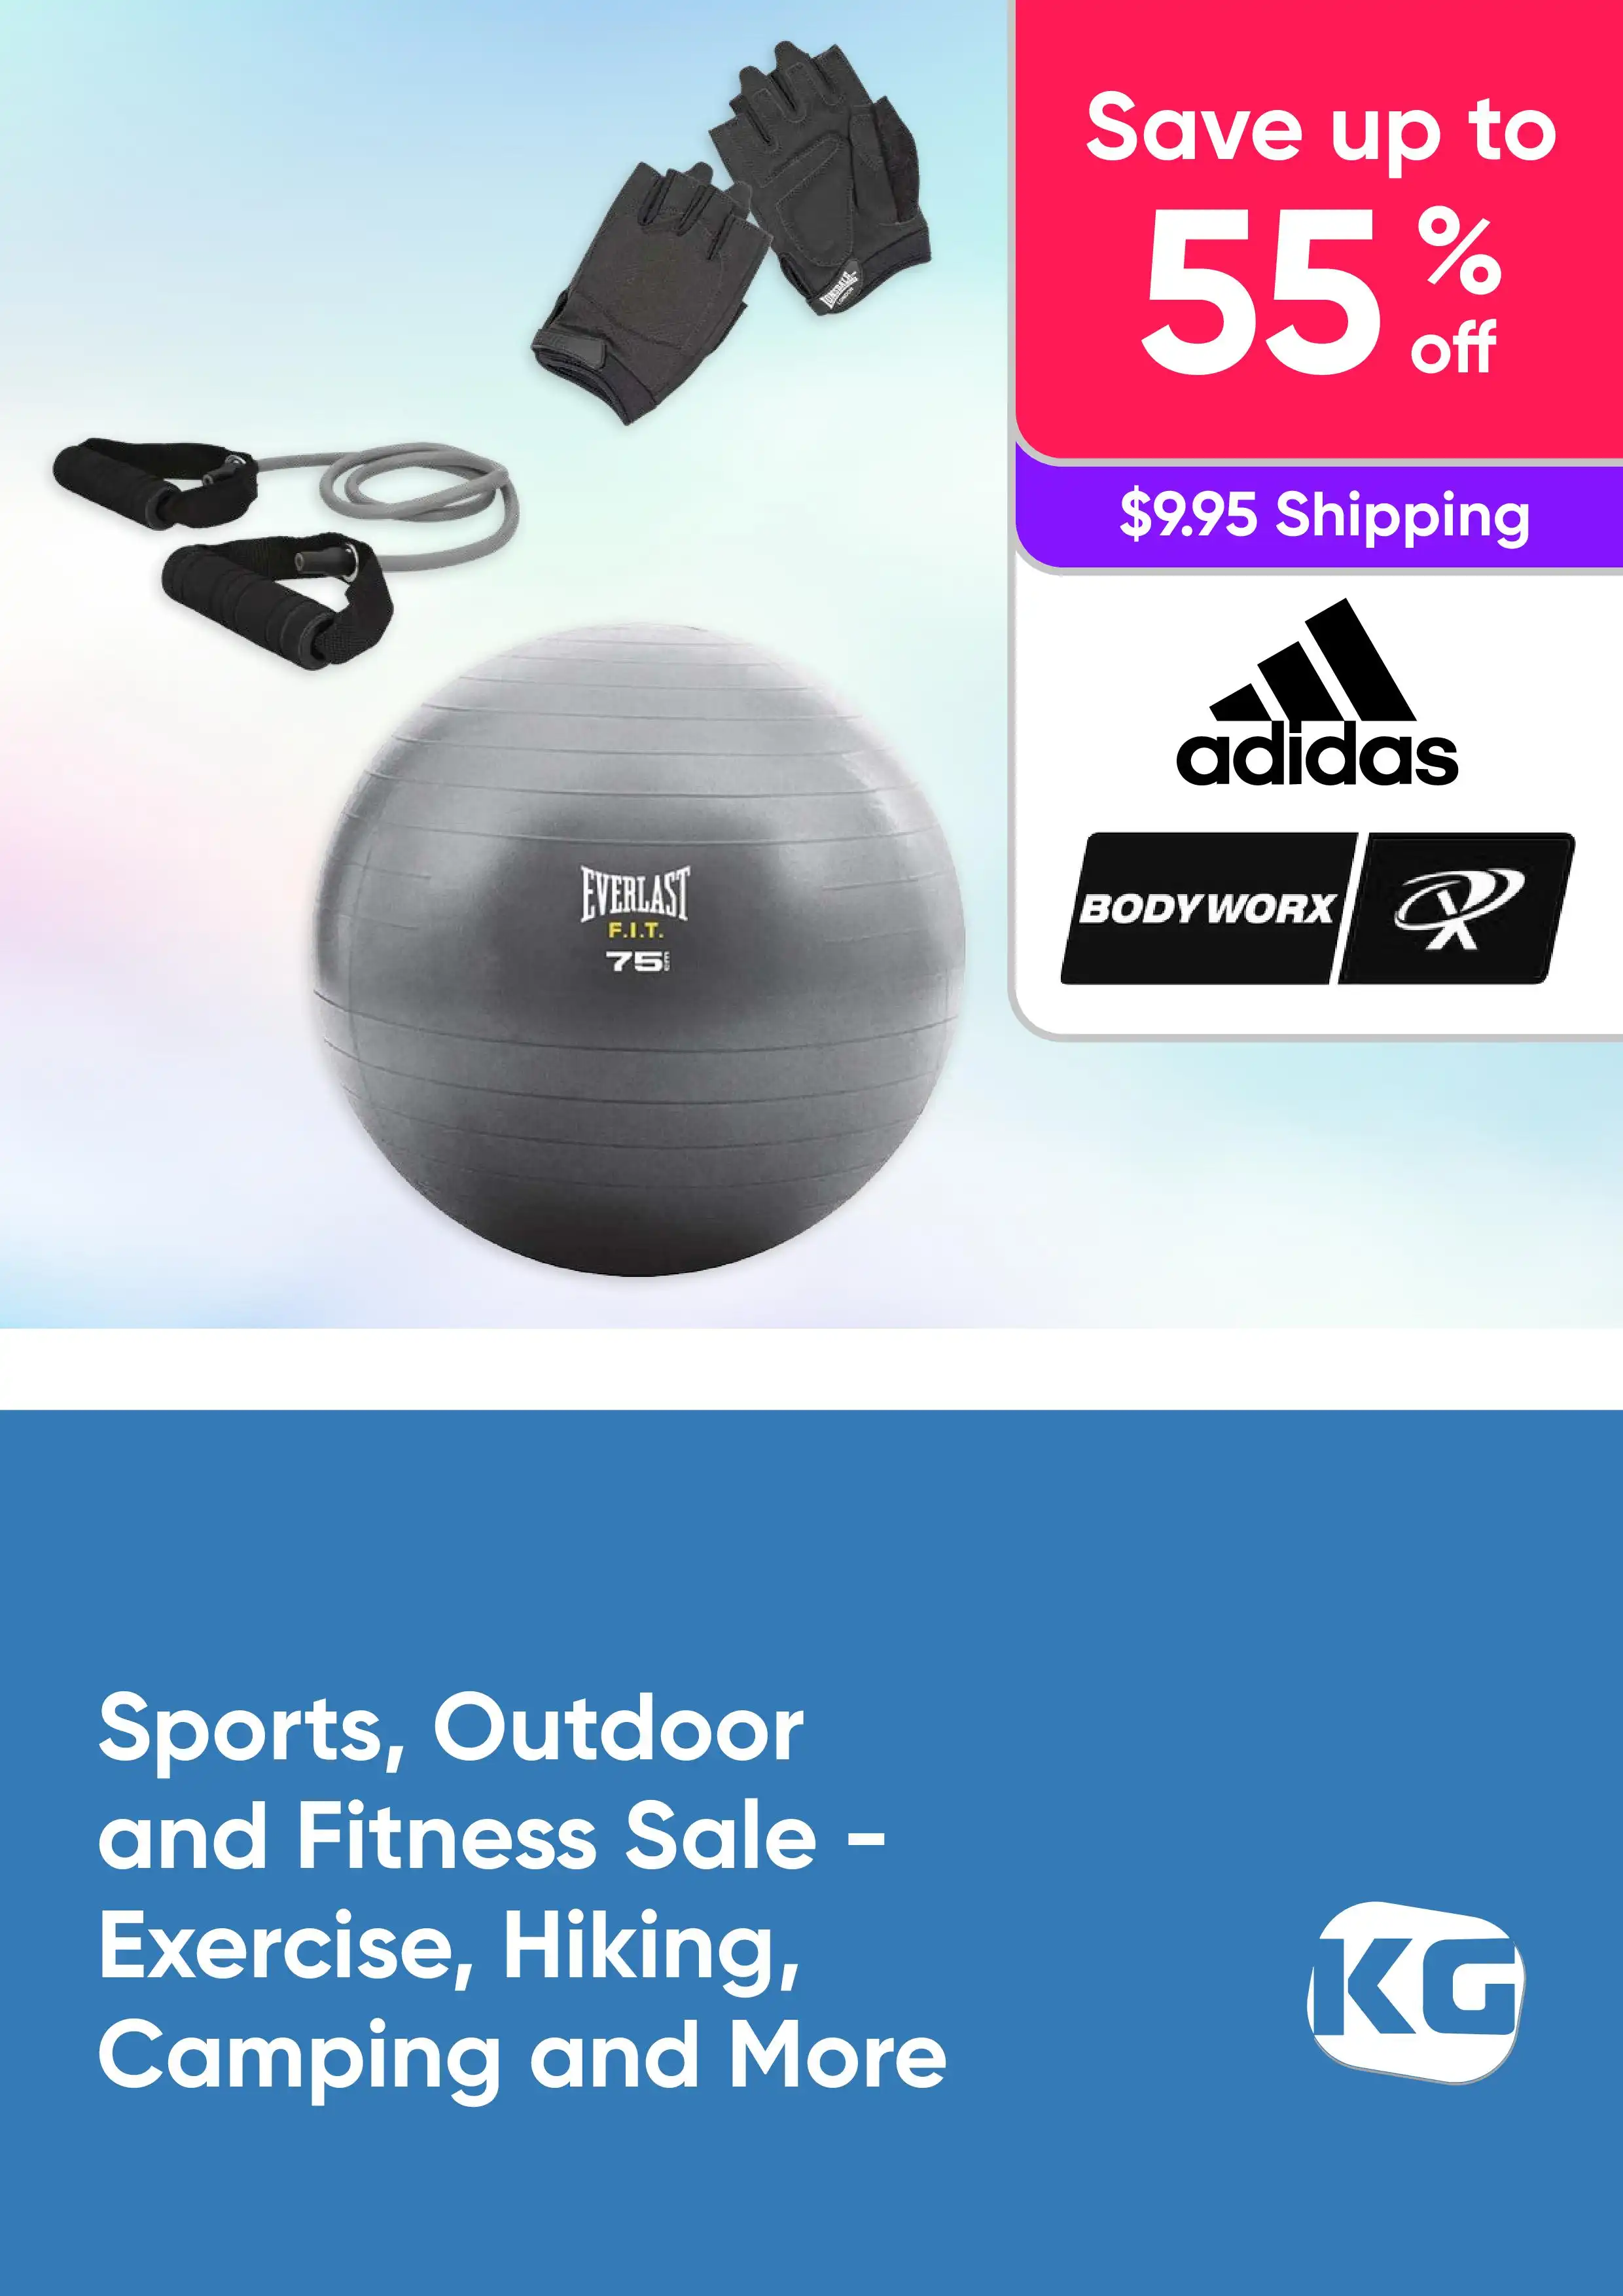 Sports, Outdoor and Fitness Sale - Save up to 55% On Exercise, Hiking, Camping and More